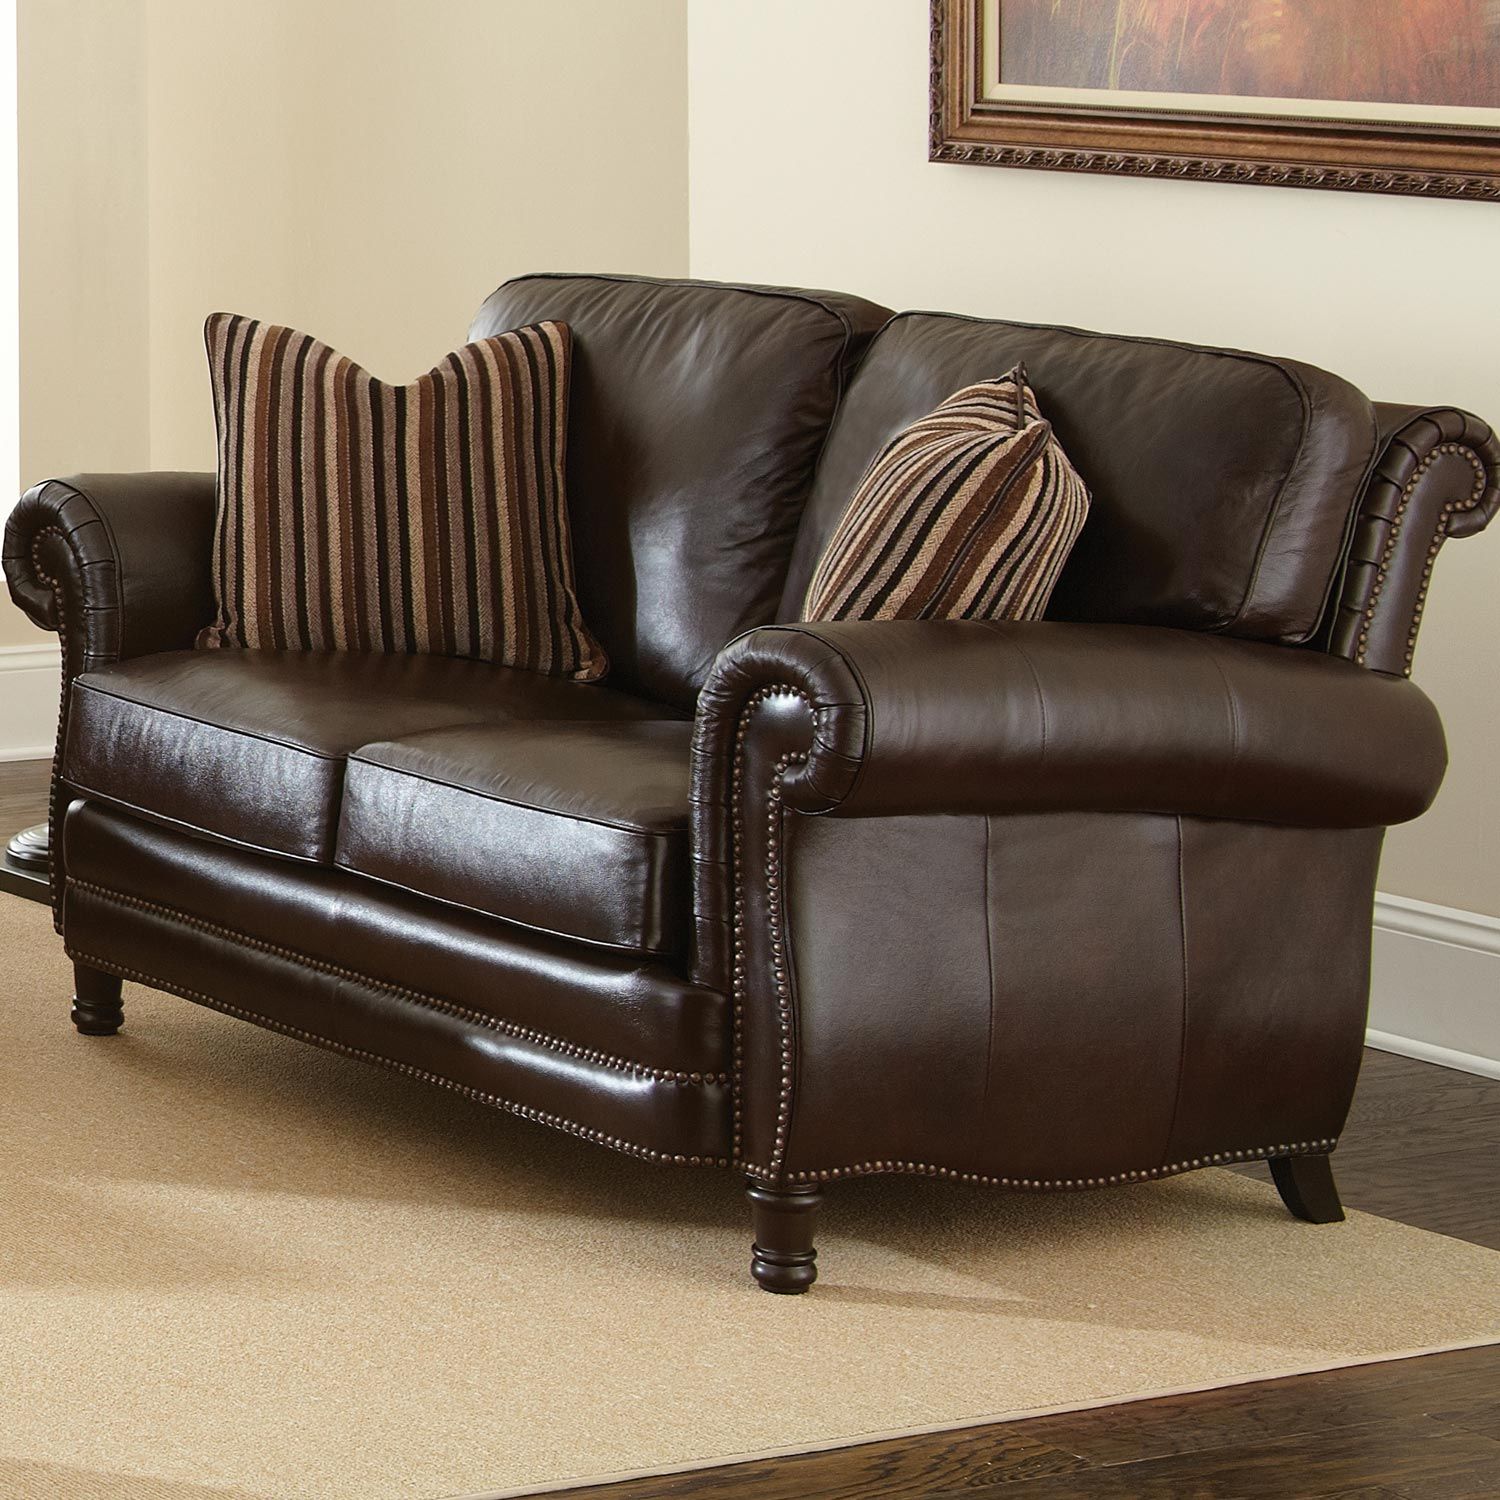 Chateau 3 Piece Leather Sofa Set – Antique Chocolate Brown | Dcg Stores With Faux Leather Sofas In Chocolate Brown (Gallery 11 of 20)